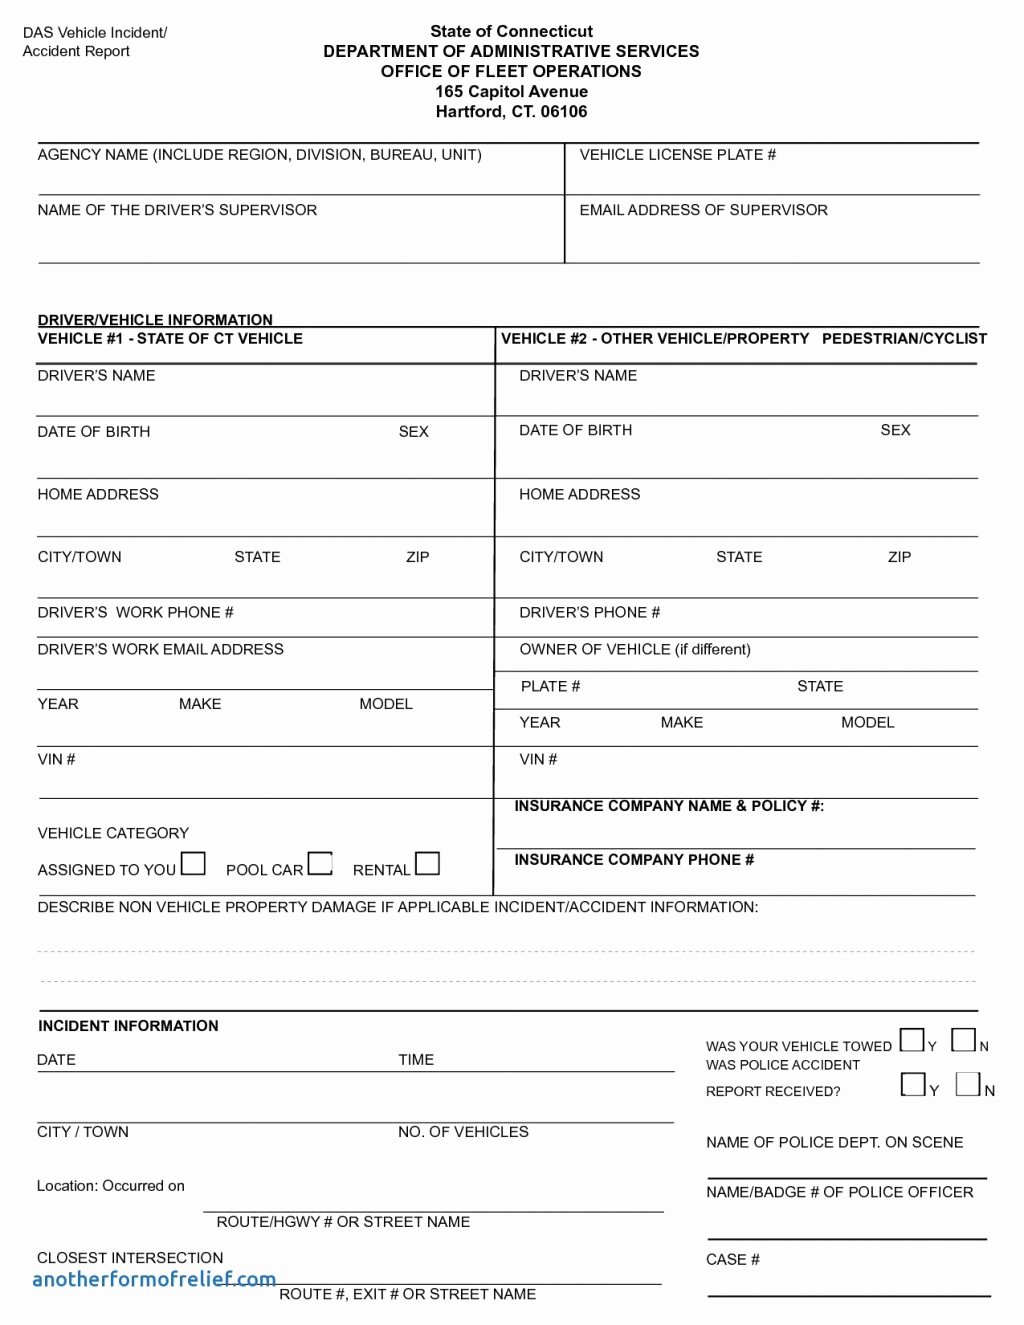 Automobile Accident Report form Template Awesome Investigation Report Template Doc Unique Safetyident